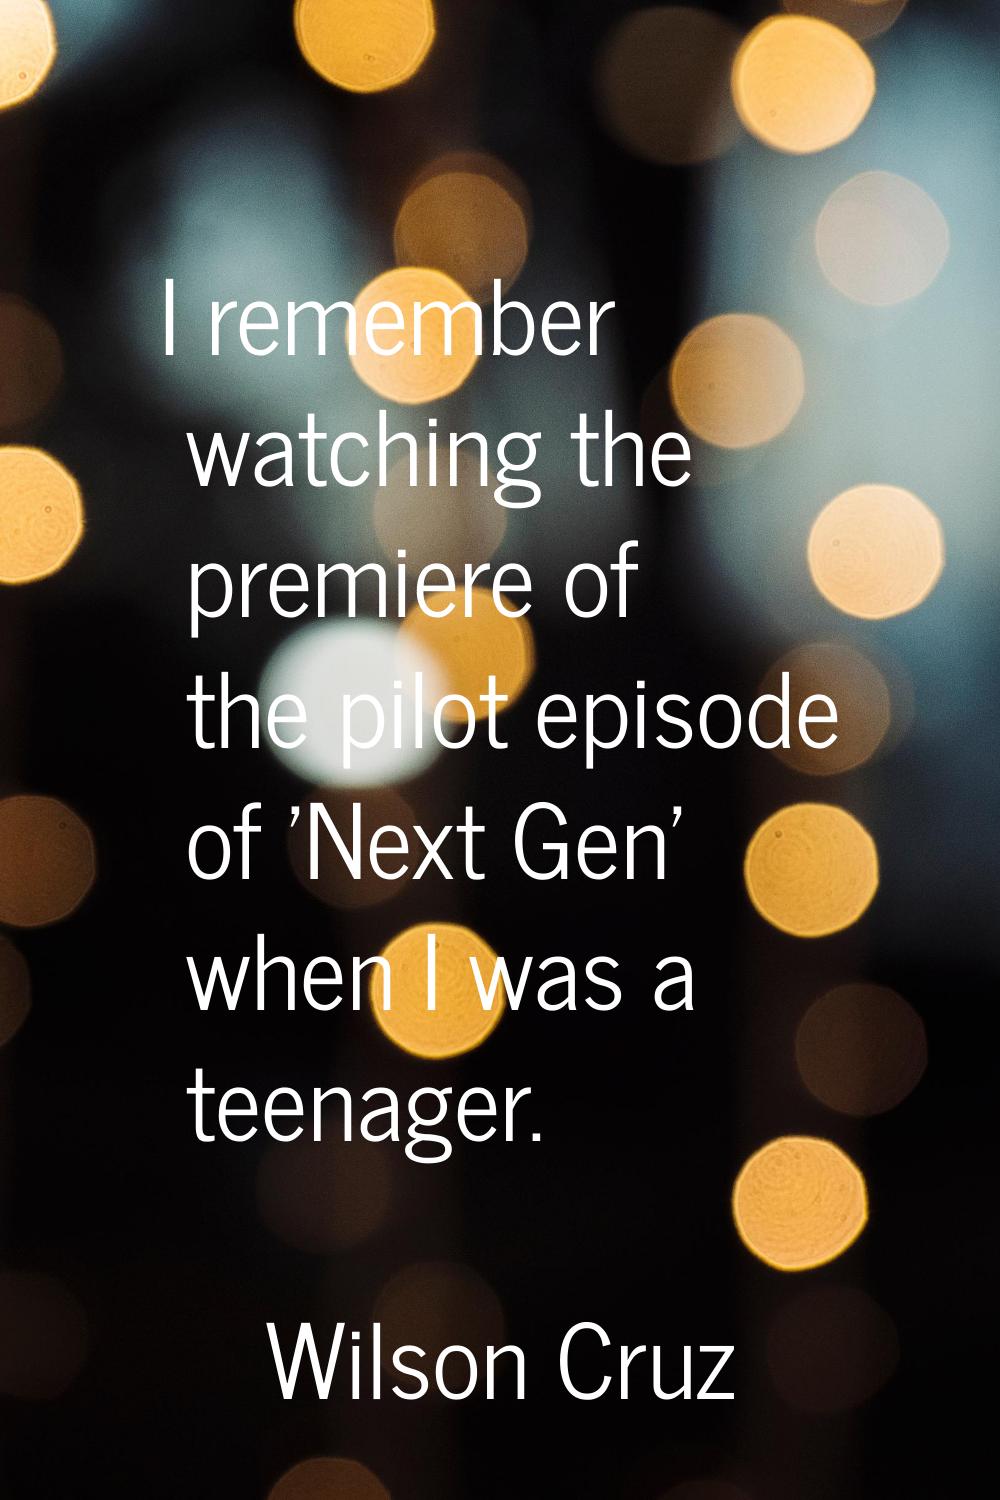 I remember watching the premiere of the pilot episode of 'Next Gen' when I was a teenager.